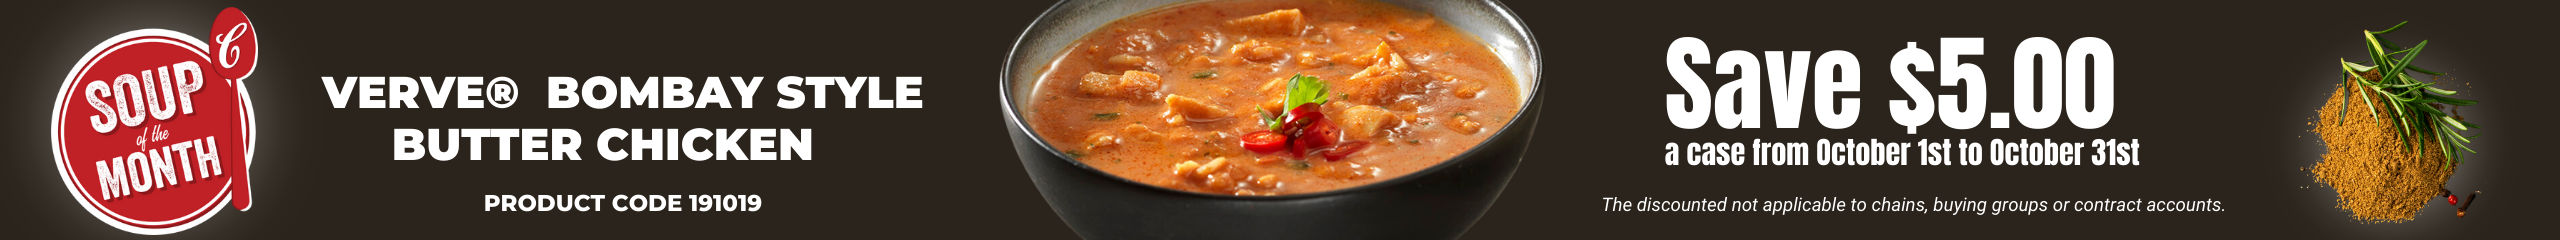 Campbells Soup of the Month Bombay Butter Chicken